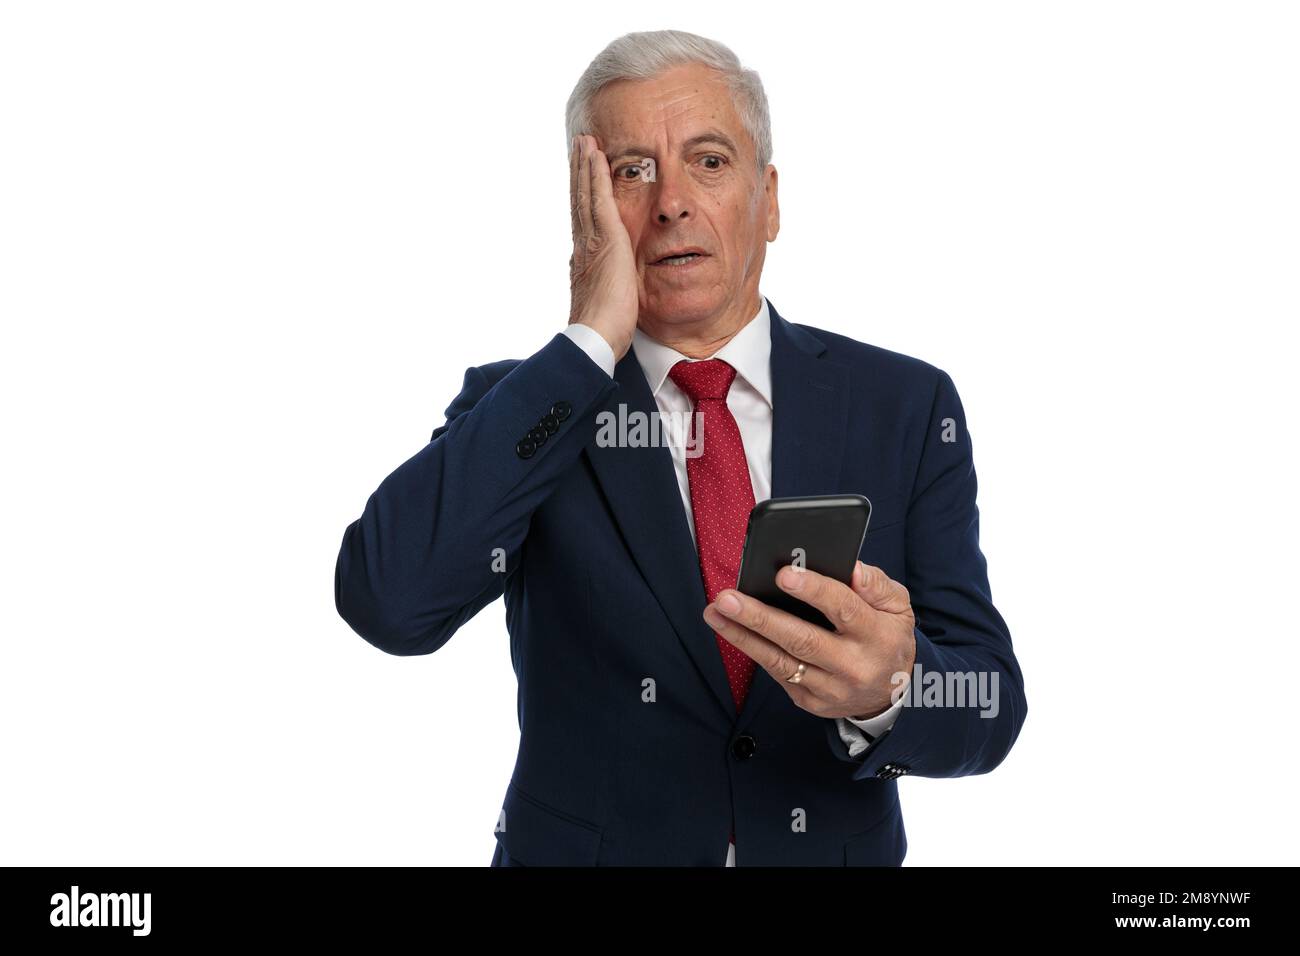 Old businessman feeling anxious to open he's emails on his mobile phone and slapping his face Stock Photo